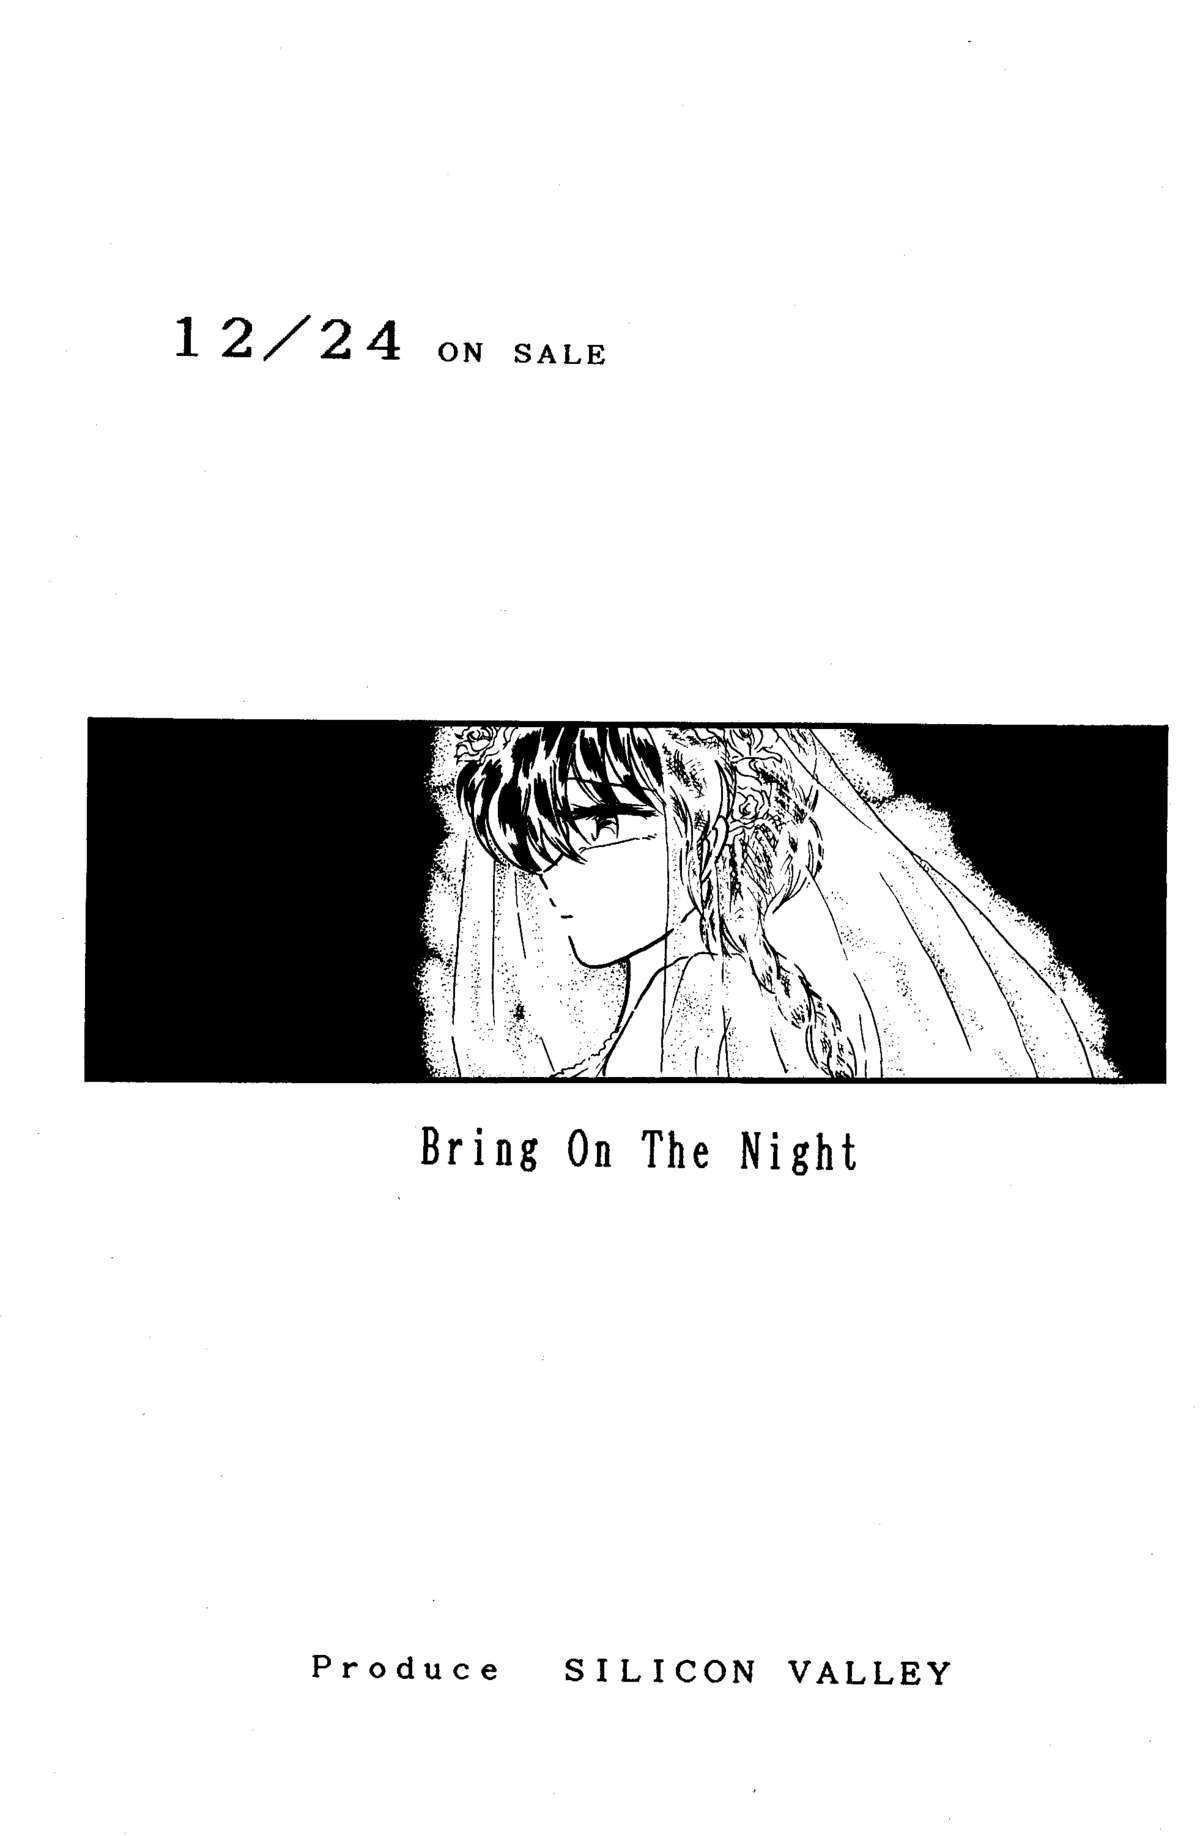 [Silicon Valley] Bring on the Night (Ranma 1/2) 